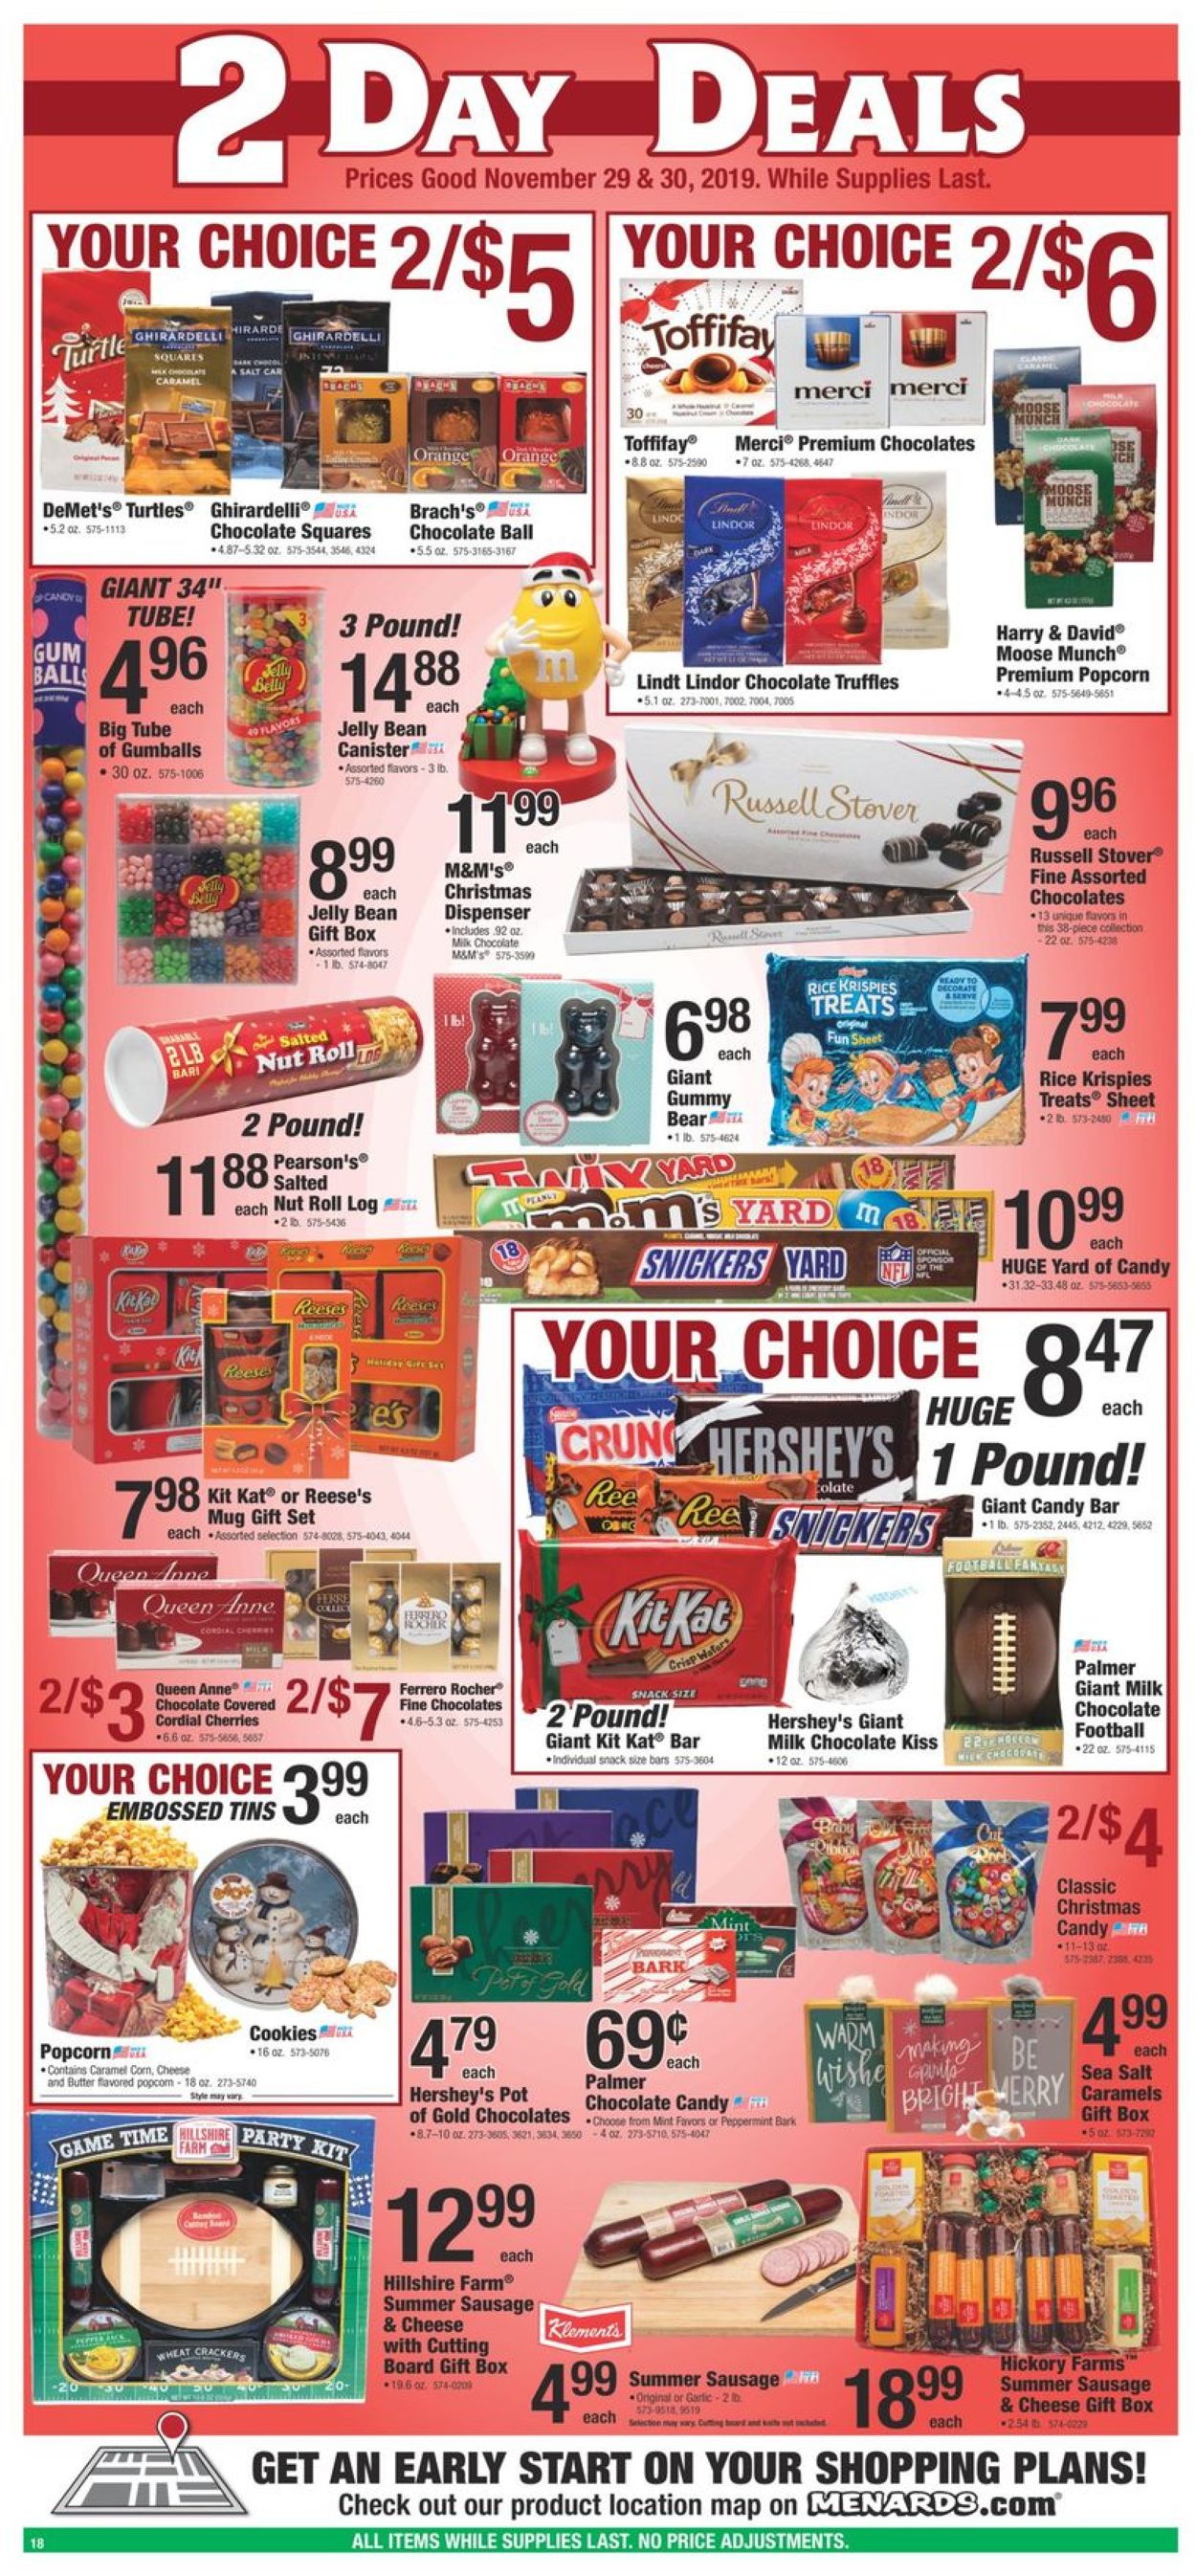 Menards - Black Friday Sale 2019 Current weekly ad 11/29 - 11/30/2019 [19] - 0